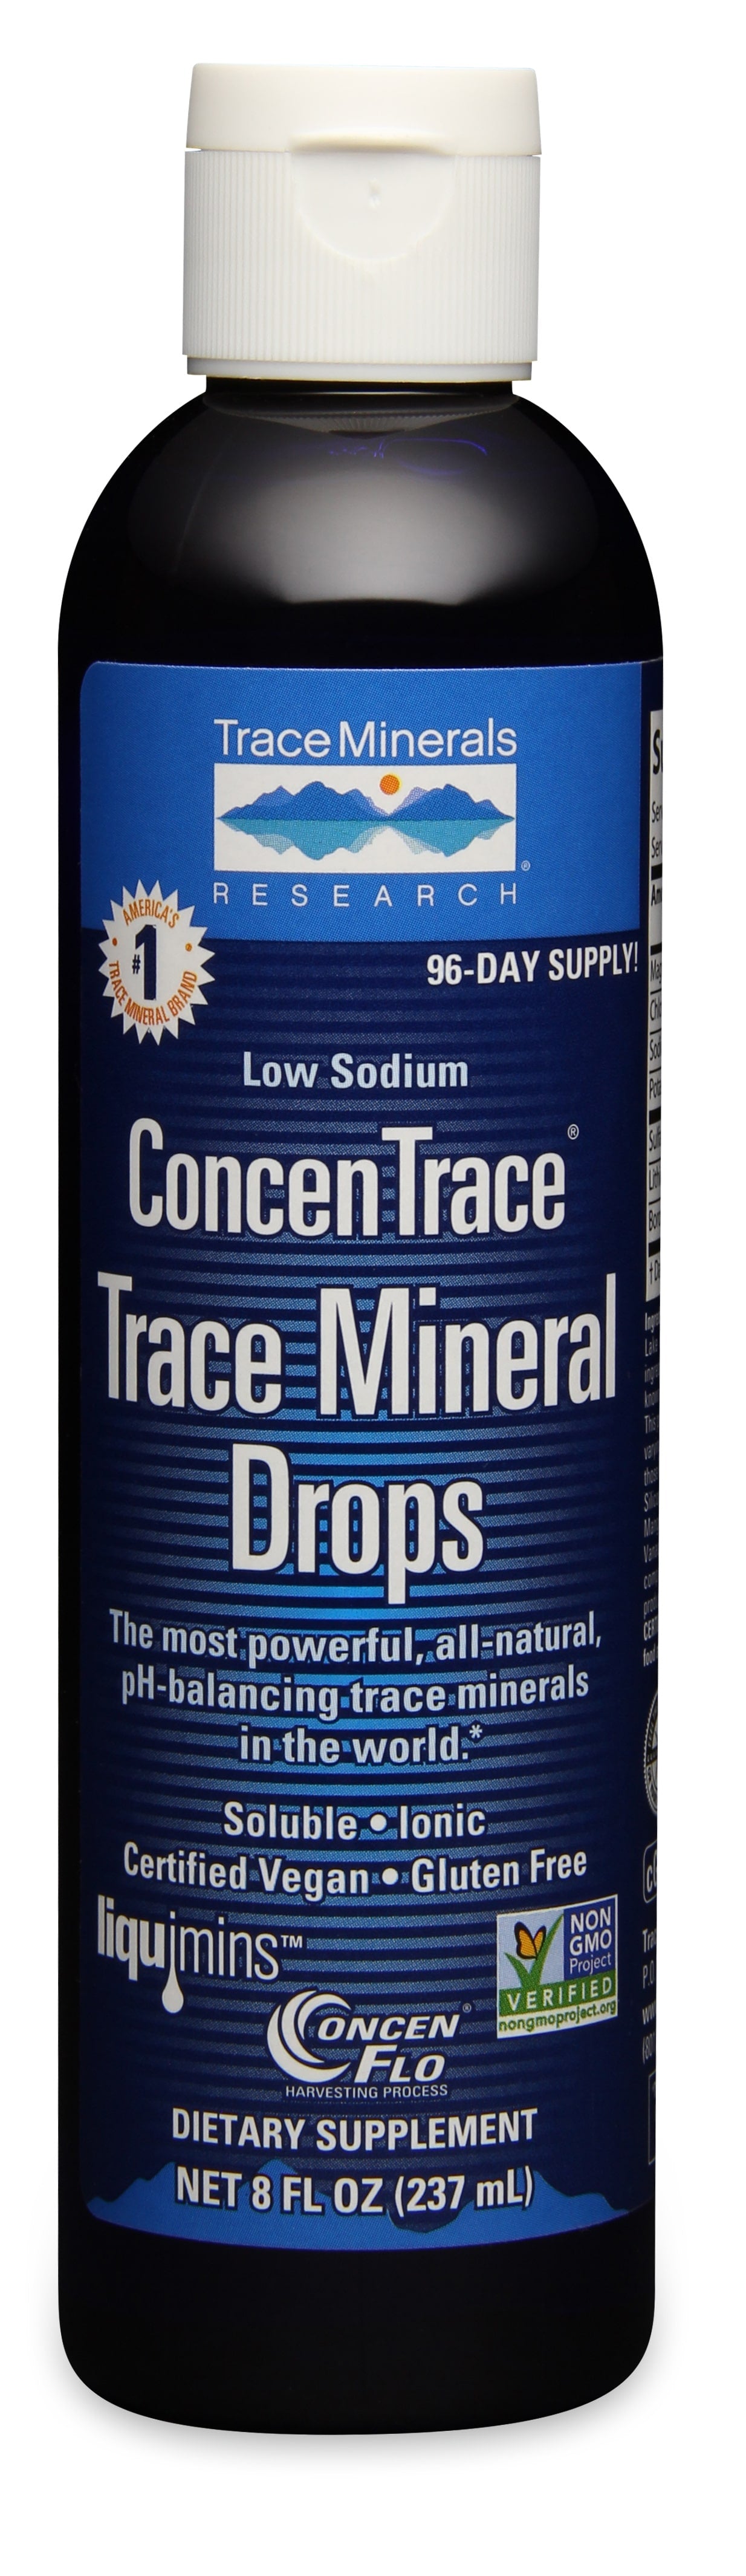 CONCENTRACE® TRACE MINERAL DROPS 0.5OZ BY TRACE MINERALS